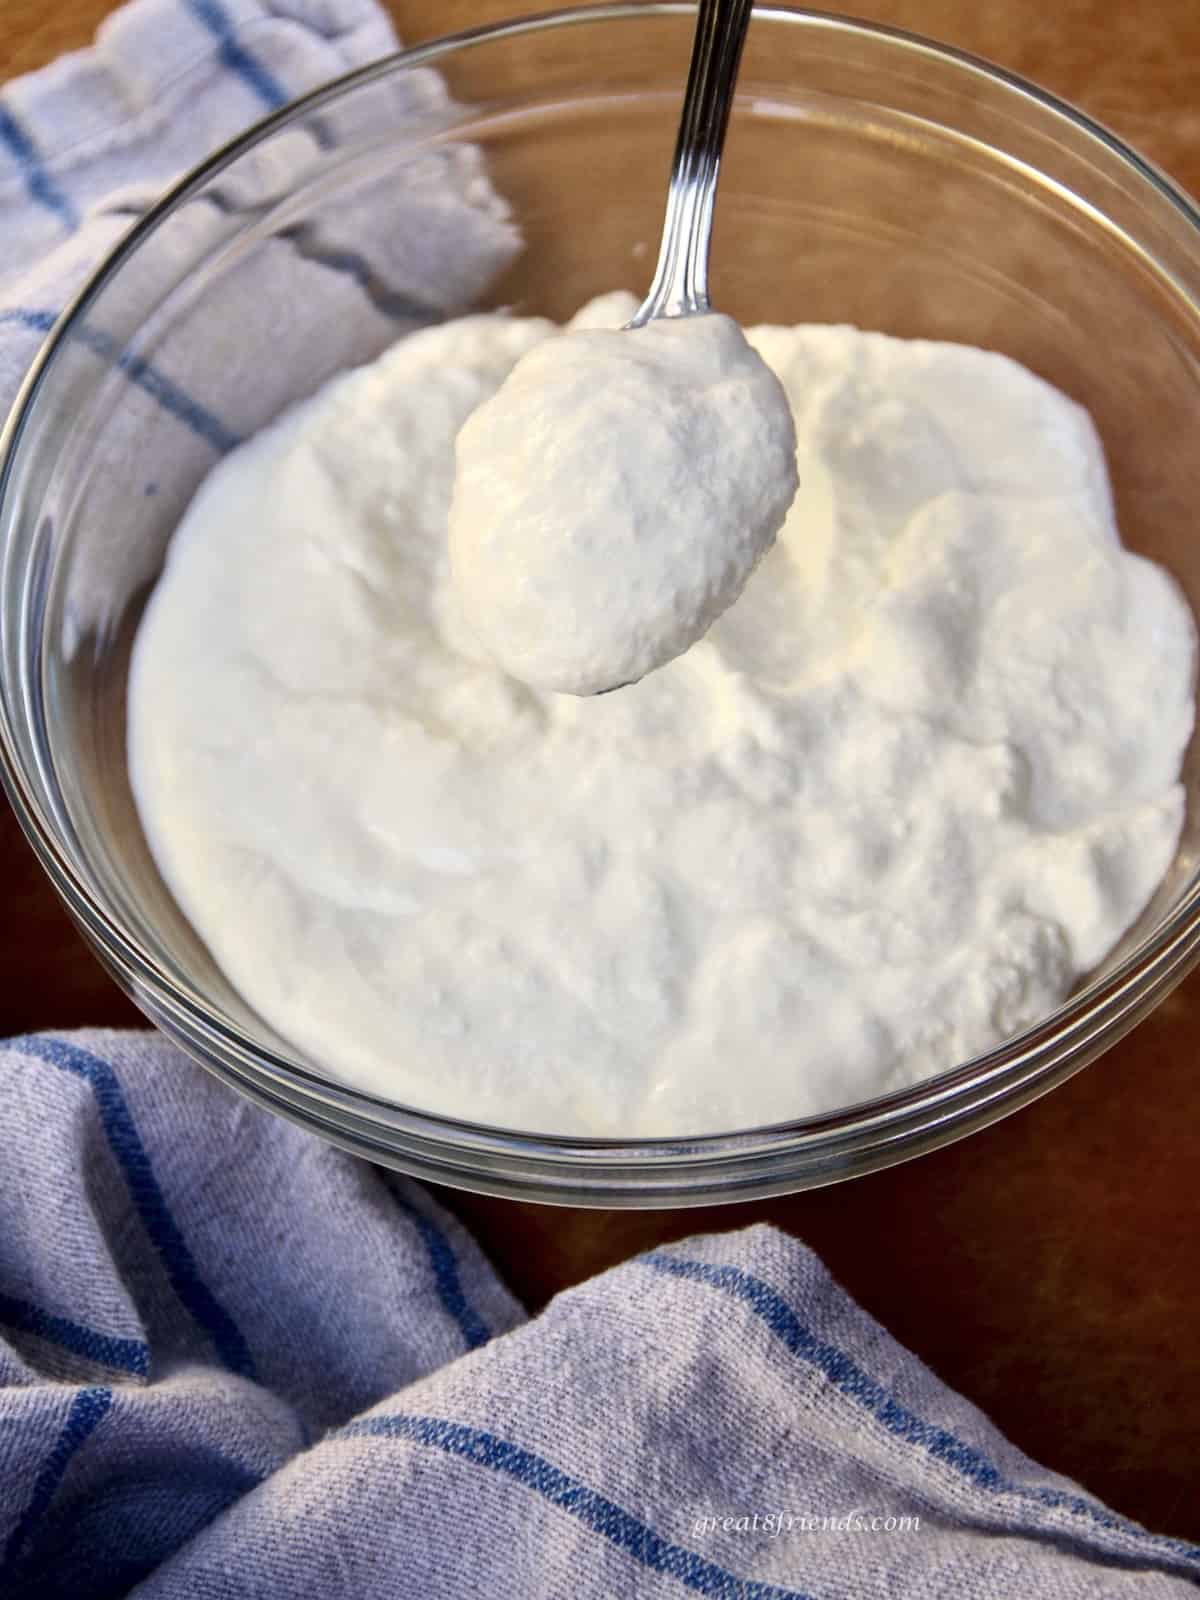 A spoonful of homemade ricotta cheese over a bowl of the cheese.